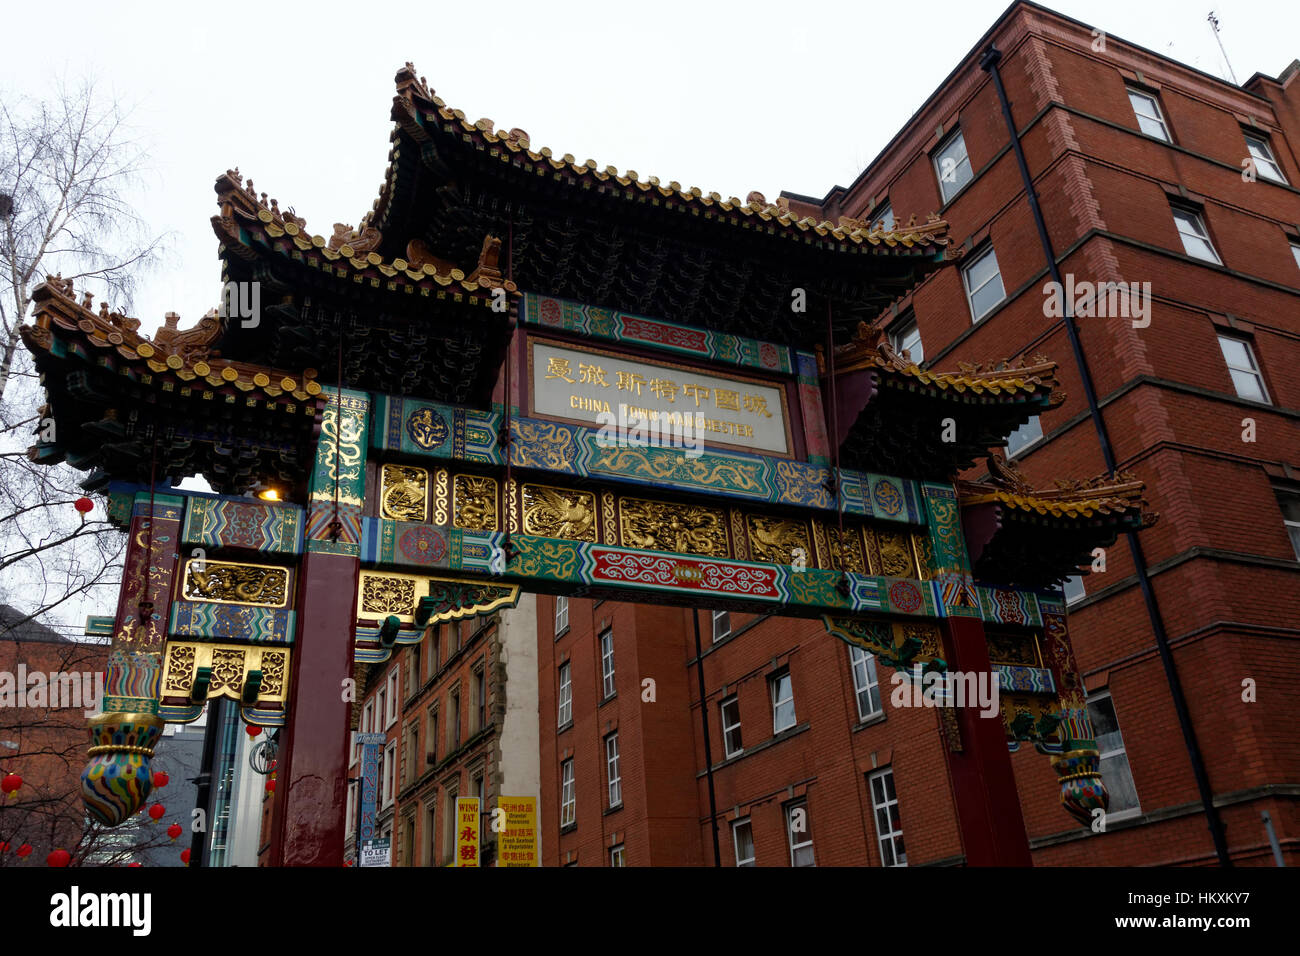 Ornamental gateway to Manchesters China Town, Manchester, UK. Stock Photo